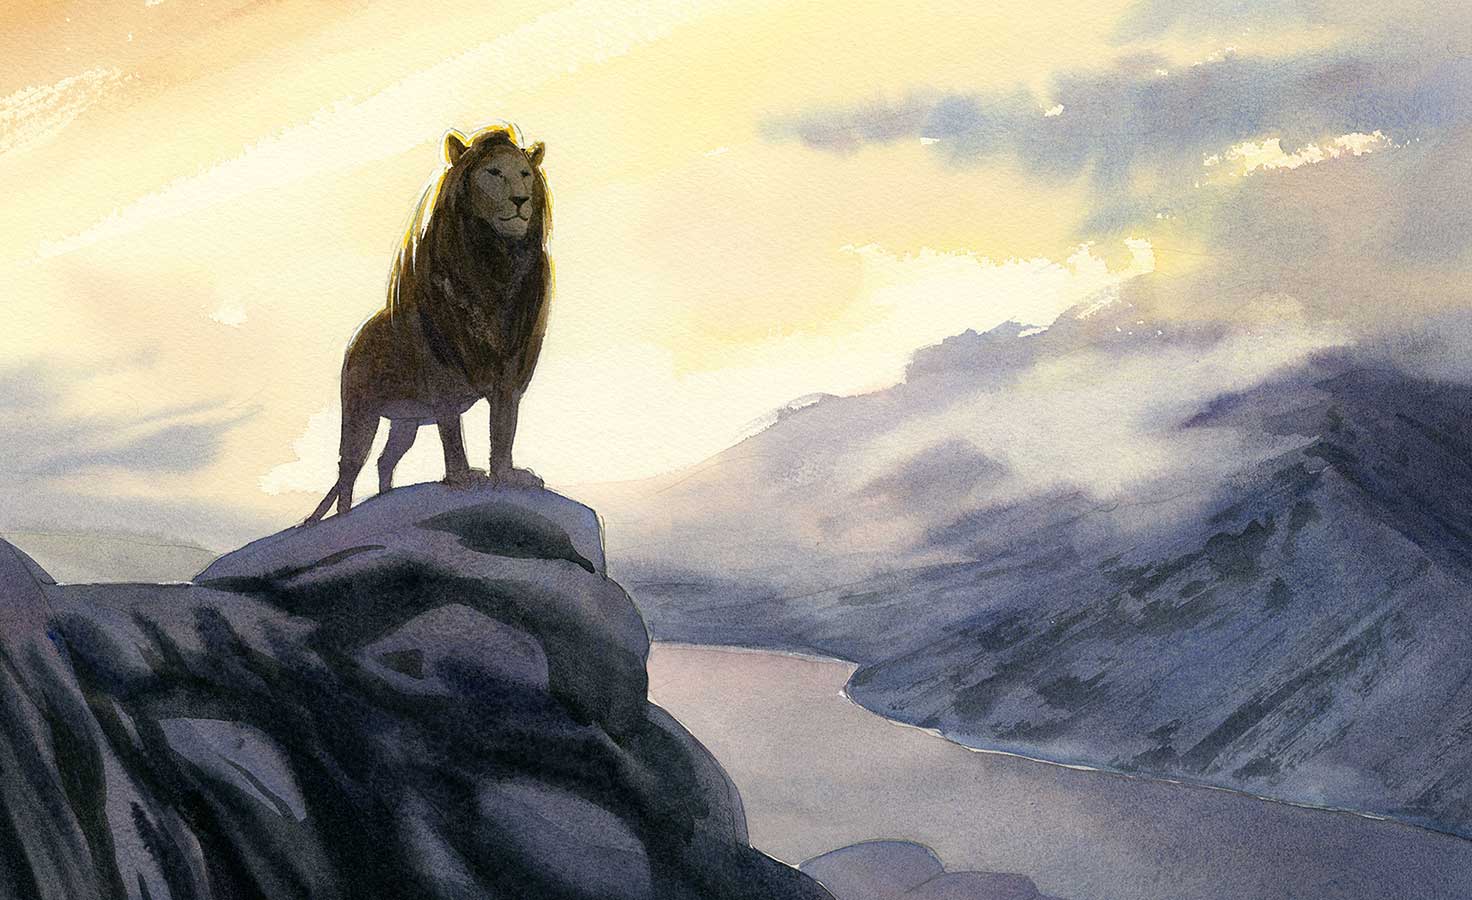 Watercolor illustration from 'Finding Narnia' of a lion standing on a rocky precipice with a distant valley and dawn clouds behind.